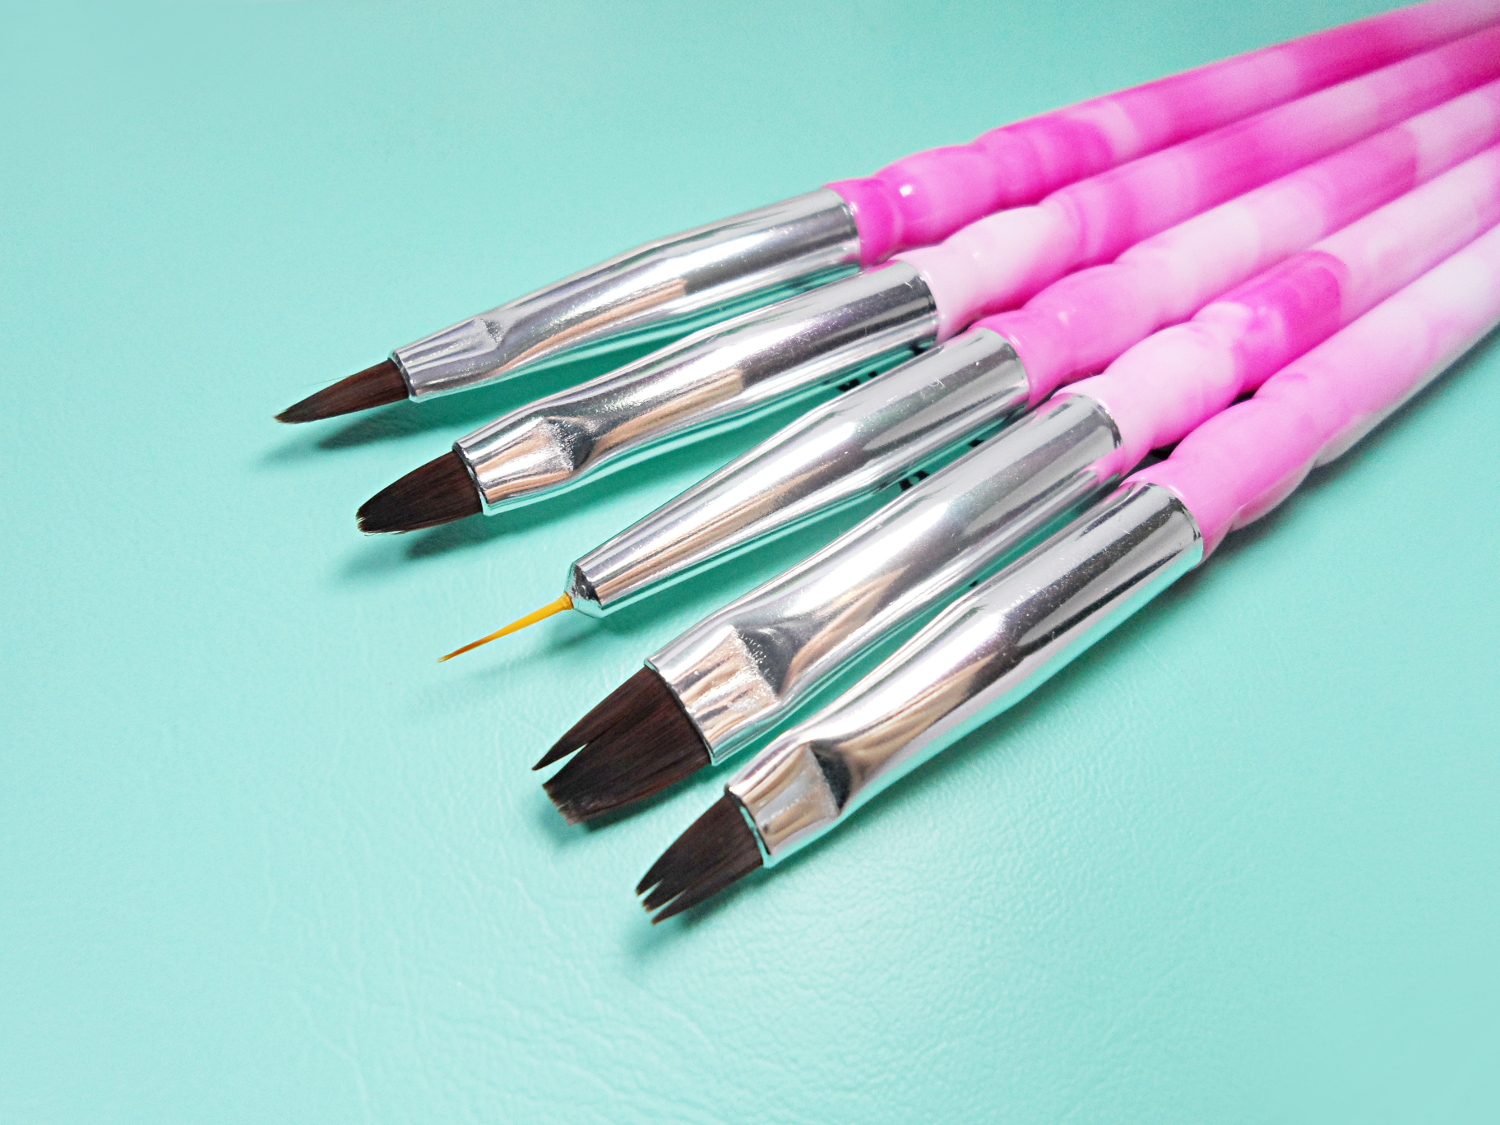 6. Affordable Nail Art Brushes - wide 10